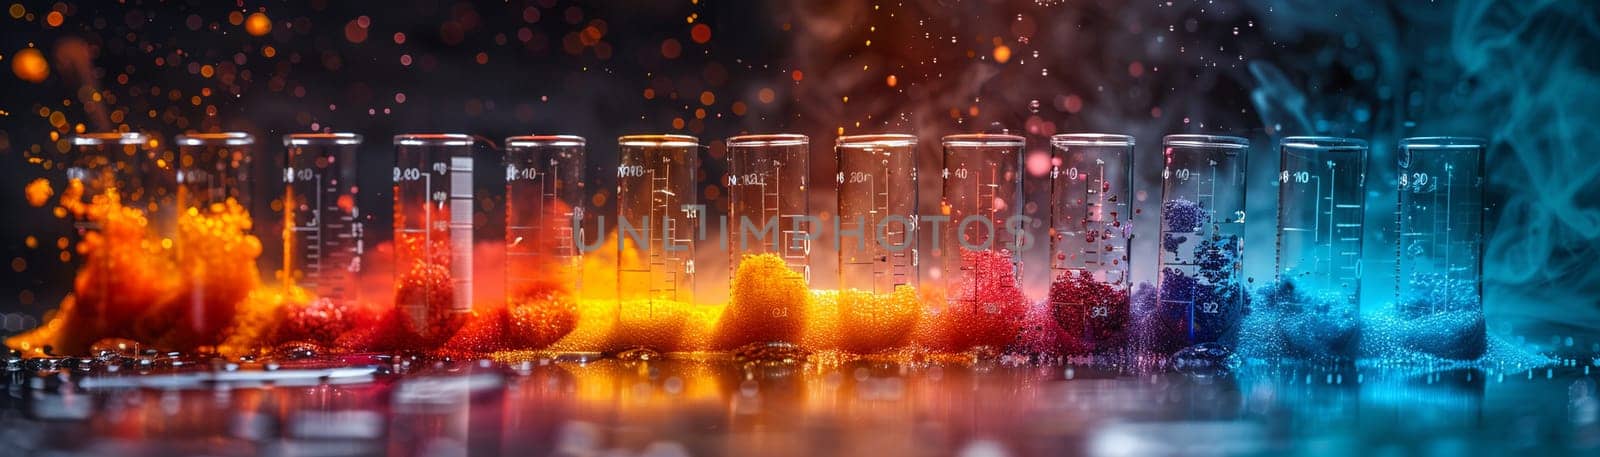 Experiment with colorful reactions in a science fair by Benzoix